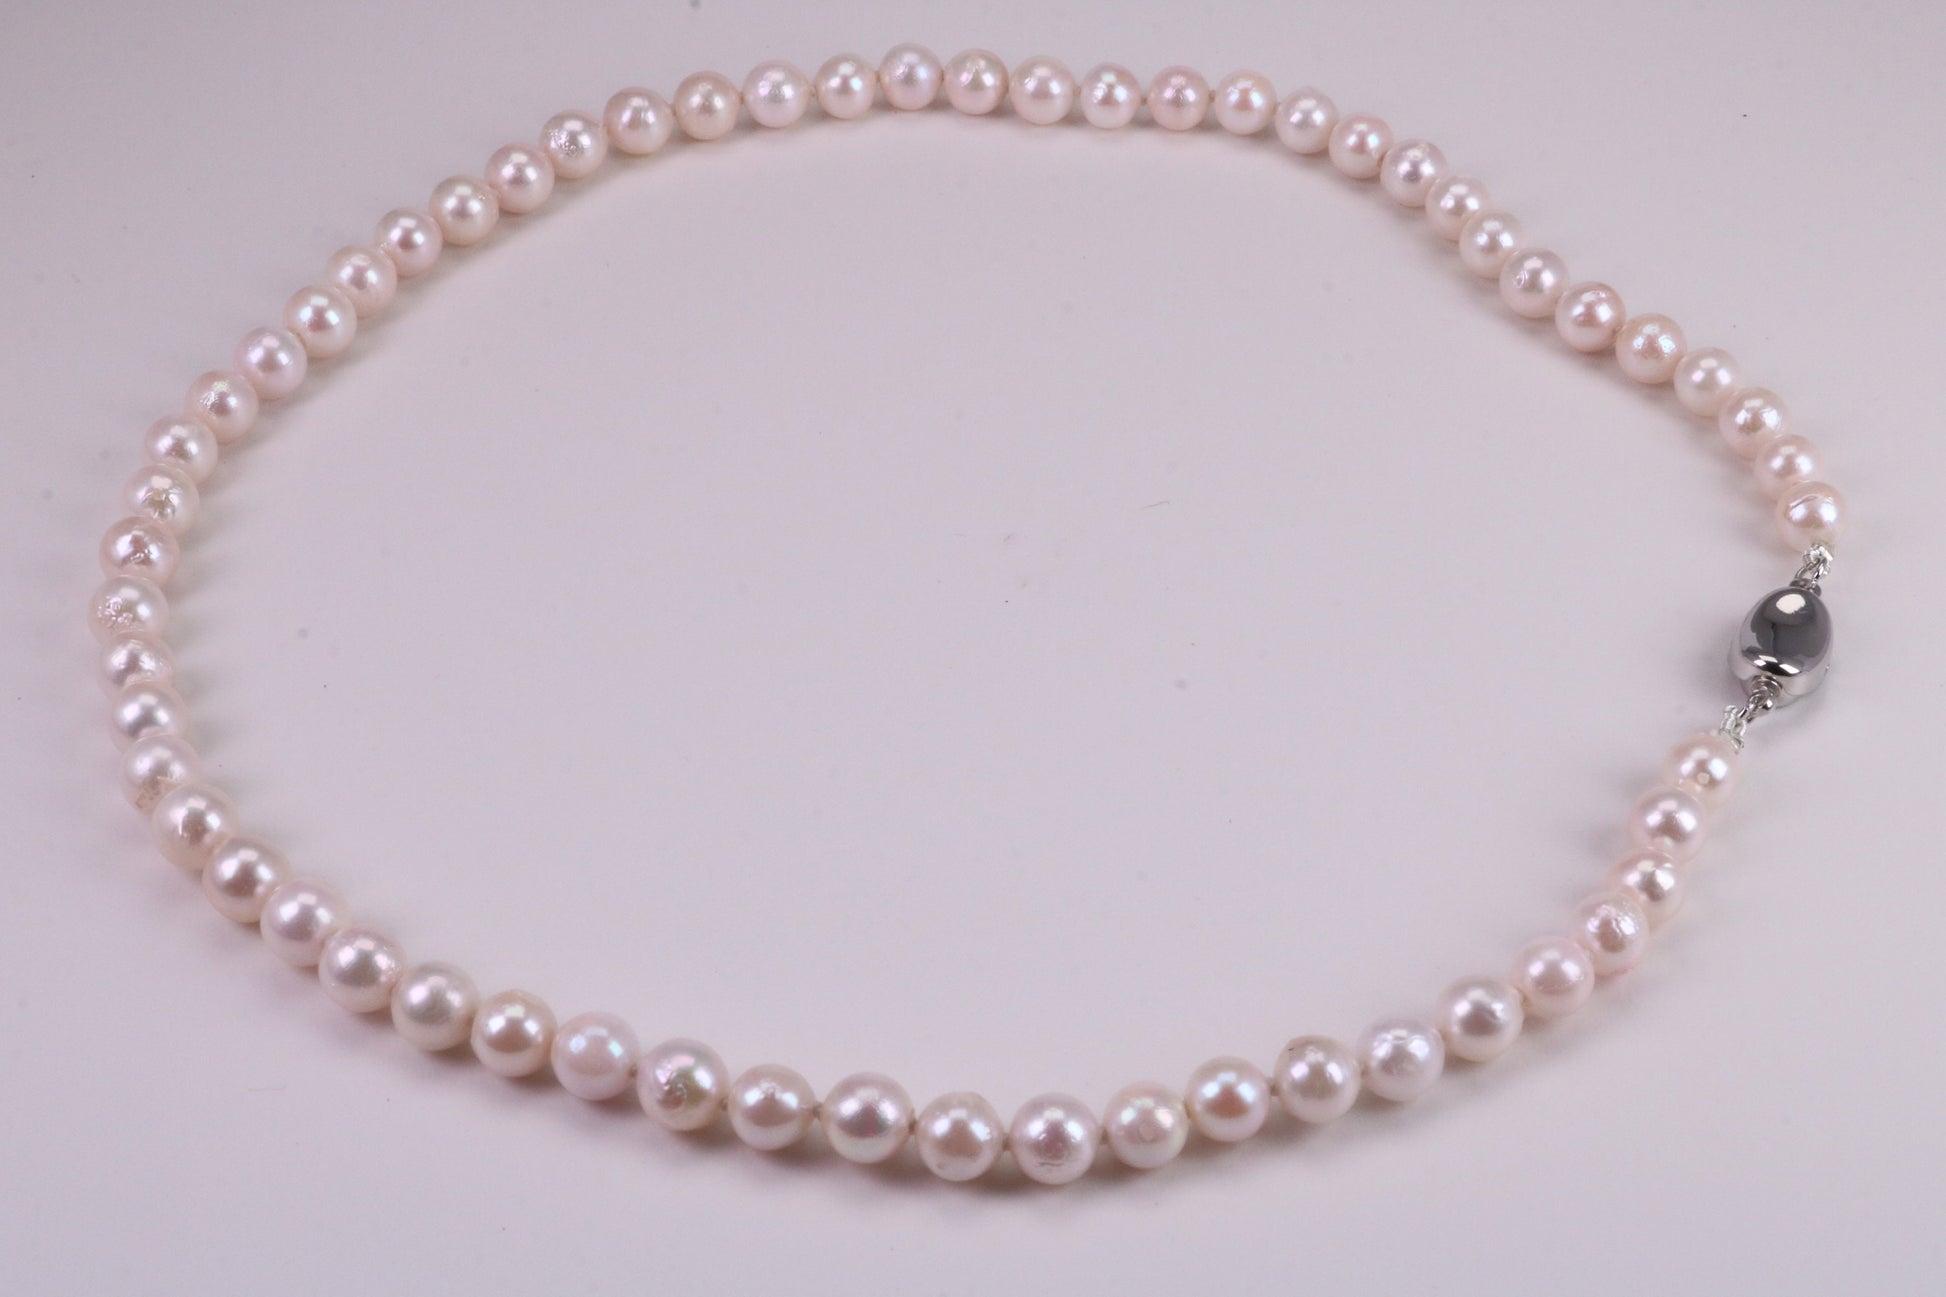 Beautiful South Sea Akoya Pearl Necklace, set with Silver Clasp, 6-7 mm Akoya Pearl, 16 inch Long Strands